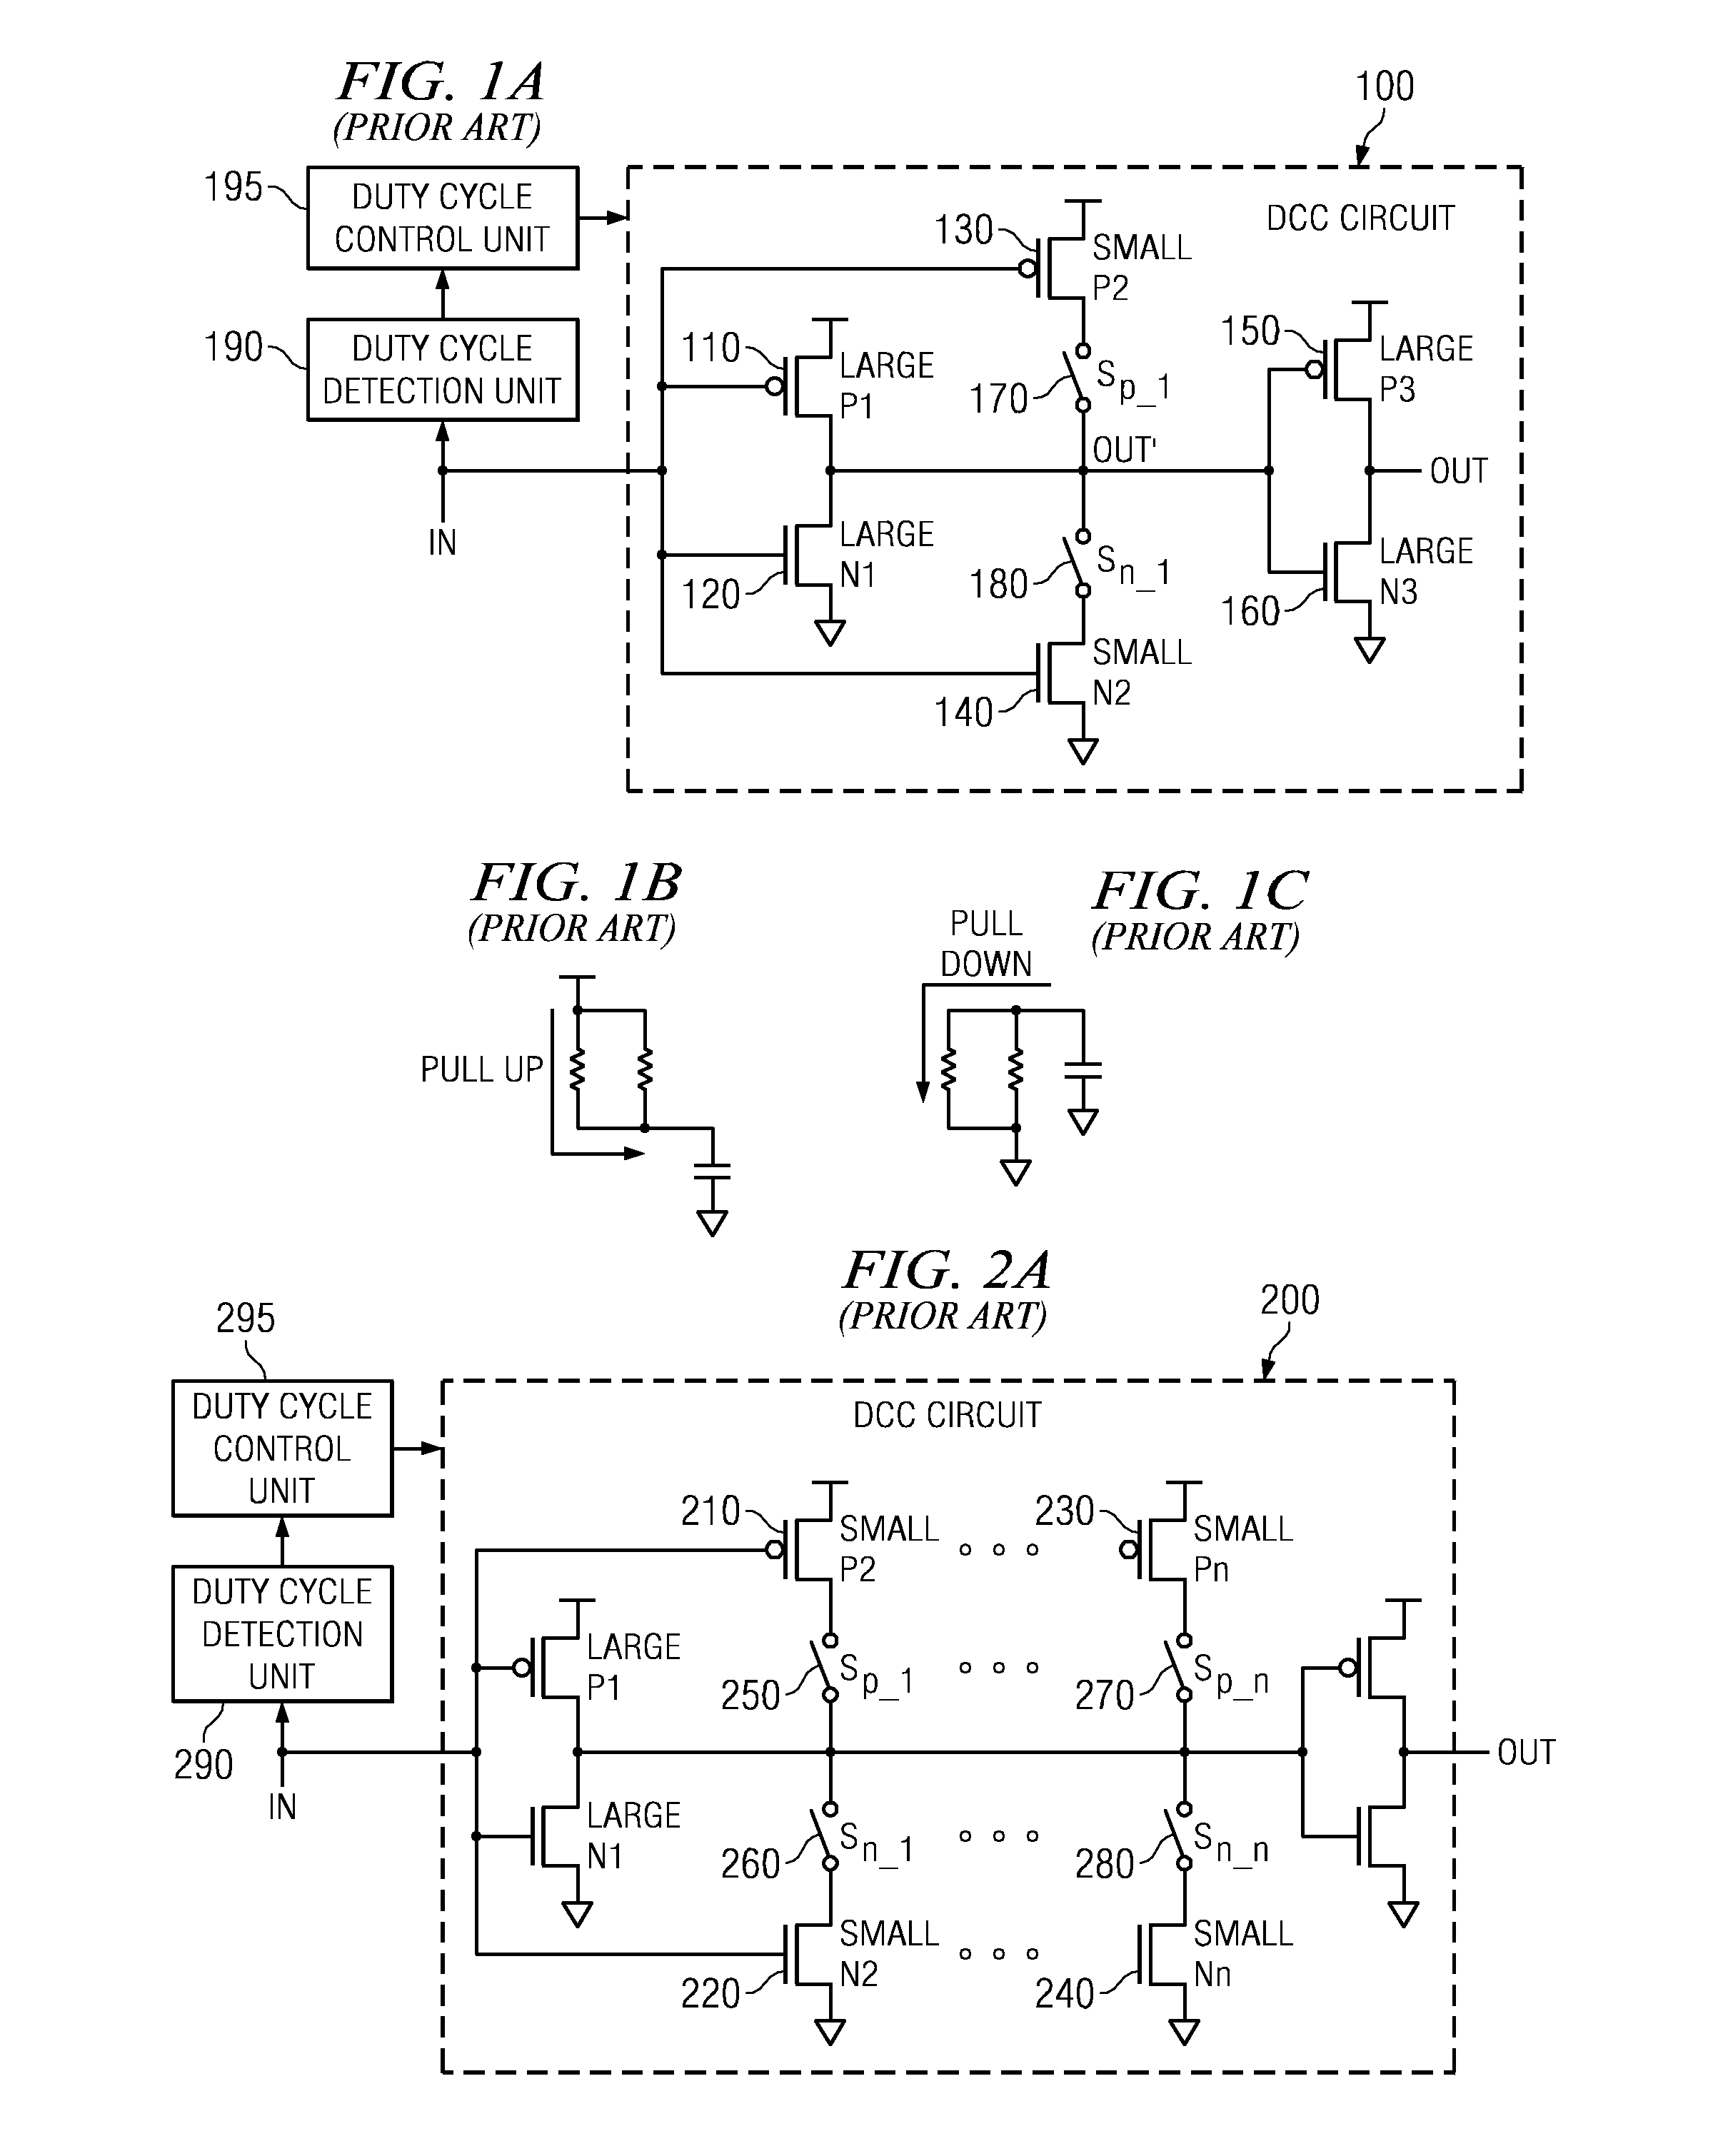 Design Structure for a Duty Cycle Correction Circuit